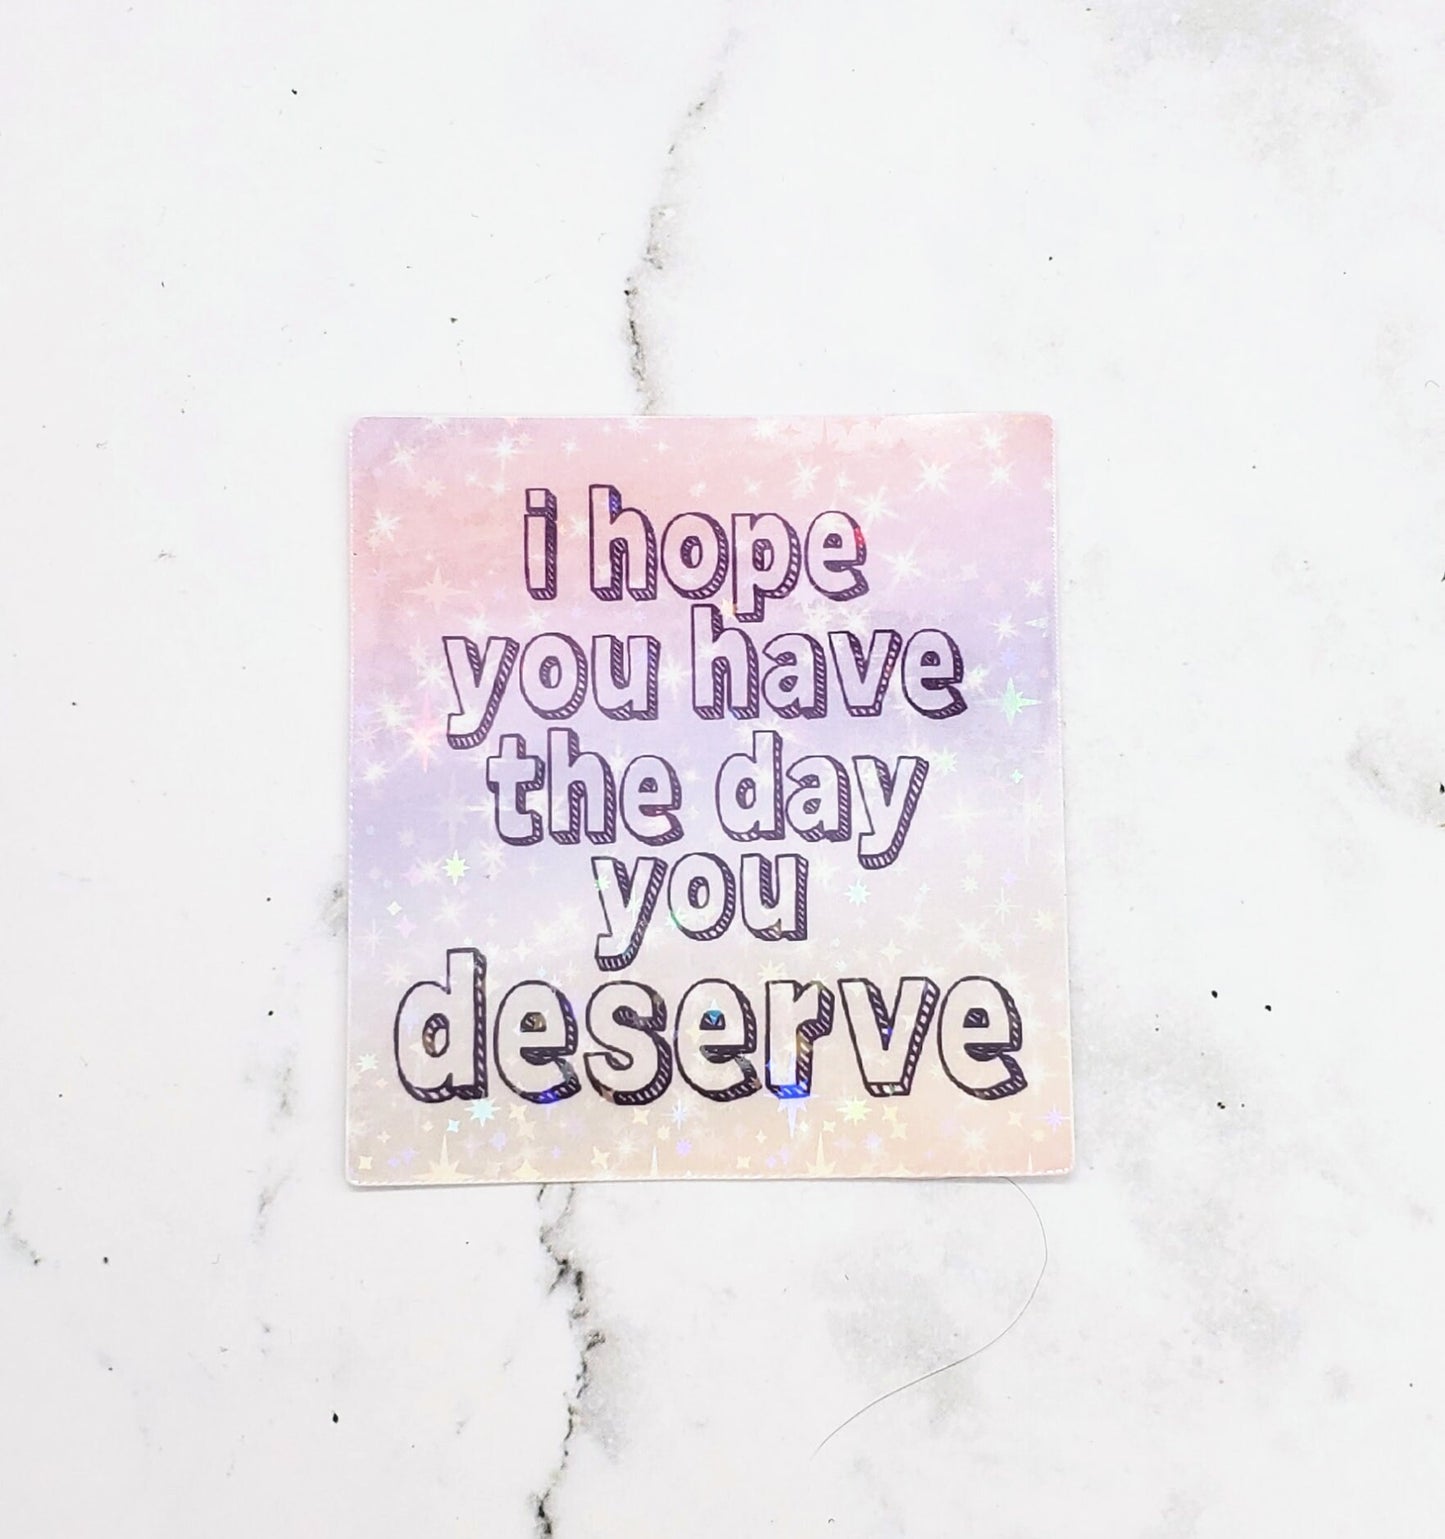 I hope you have the day you deserve sticker